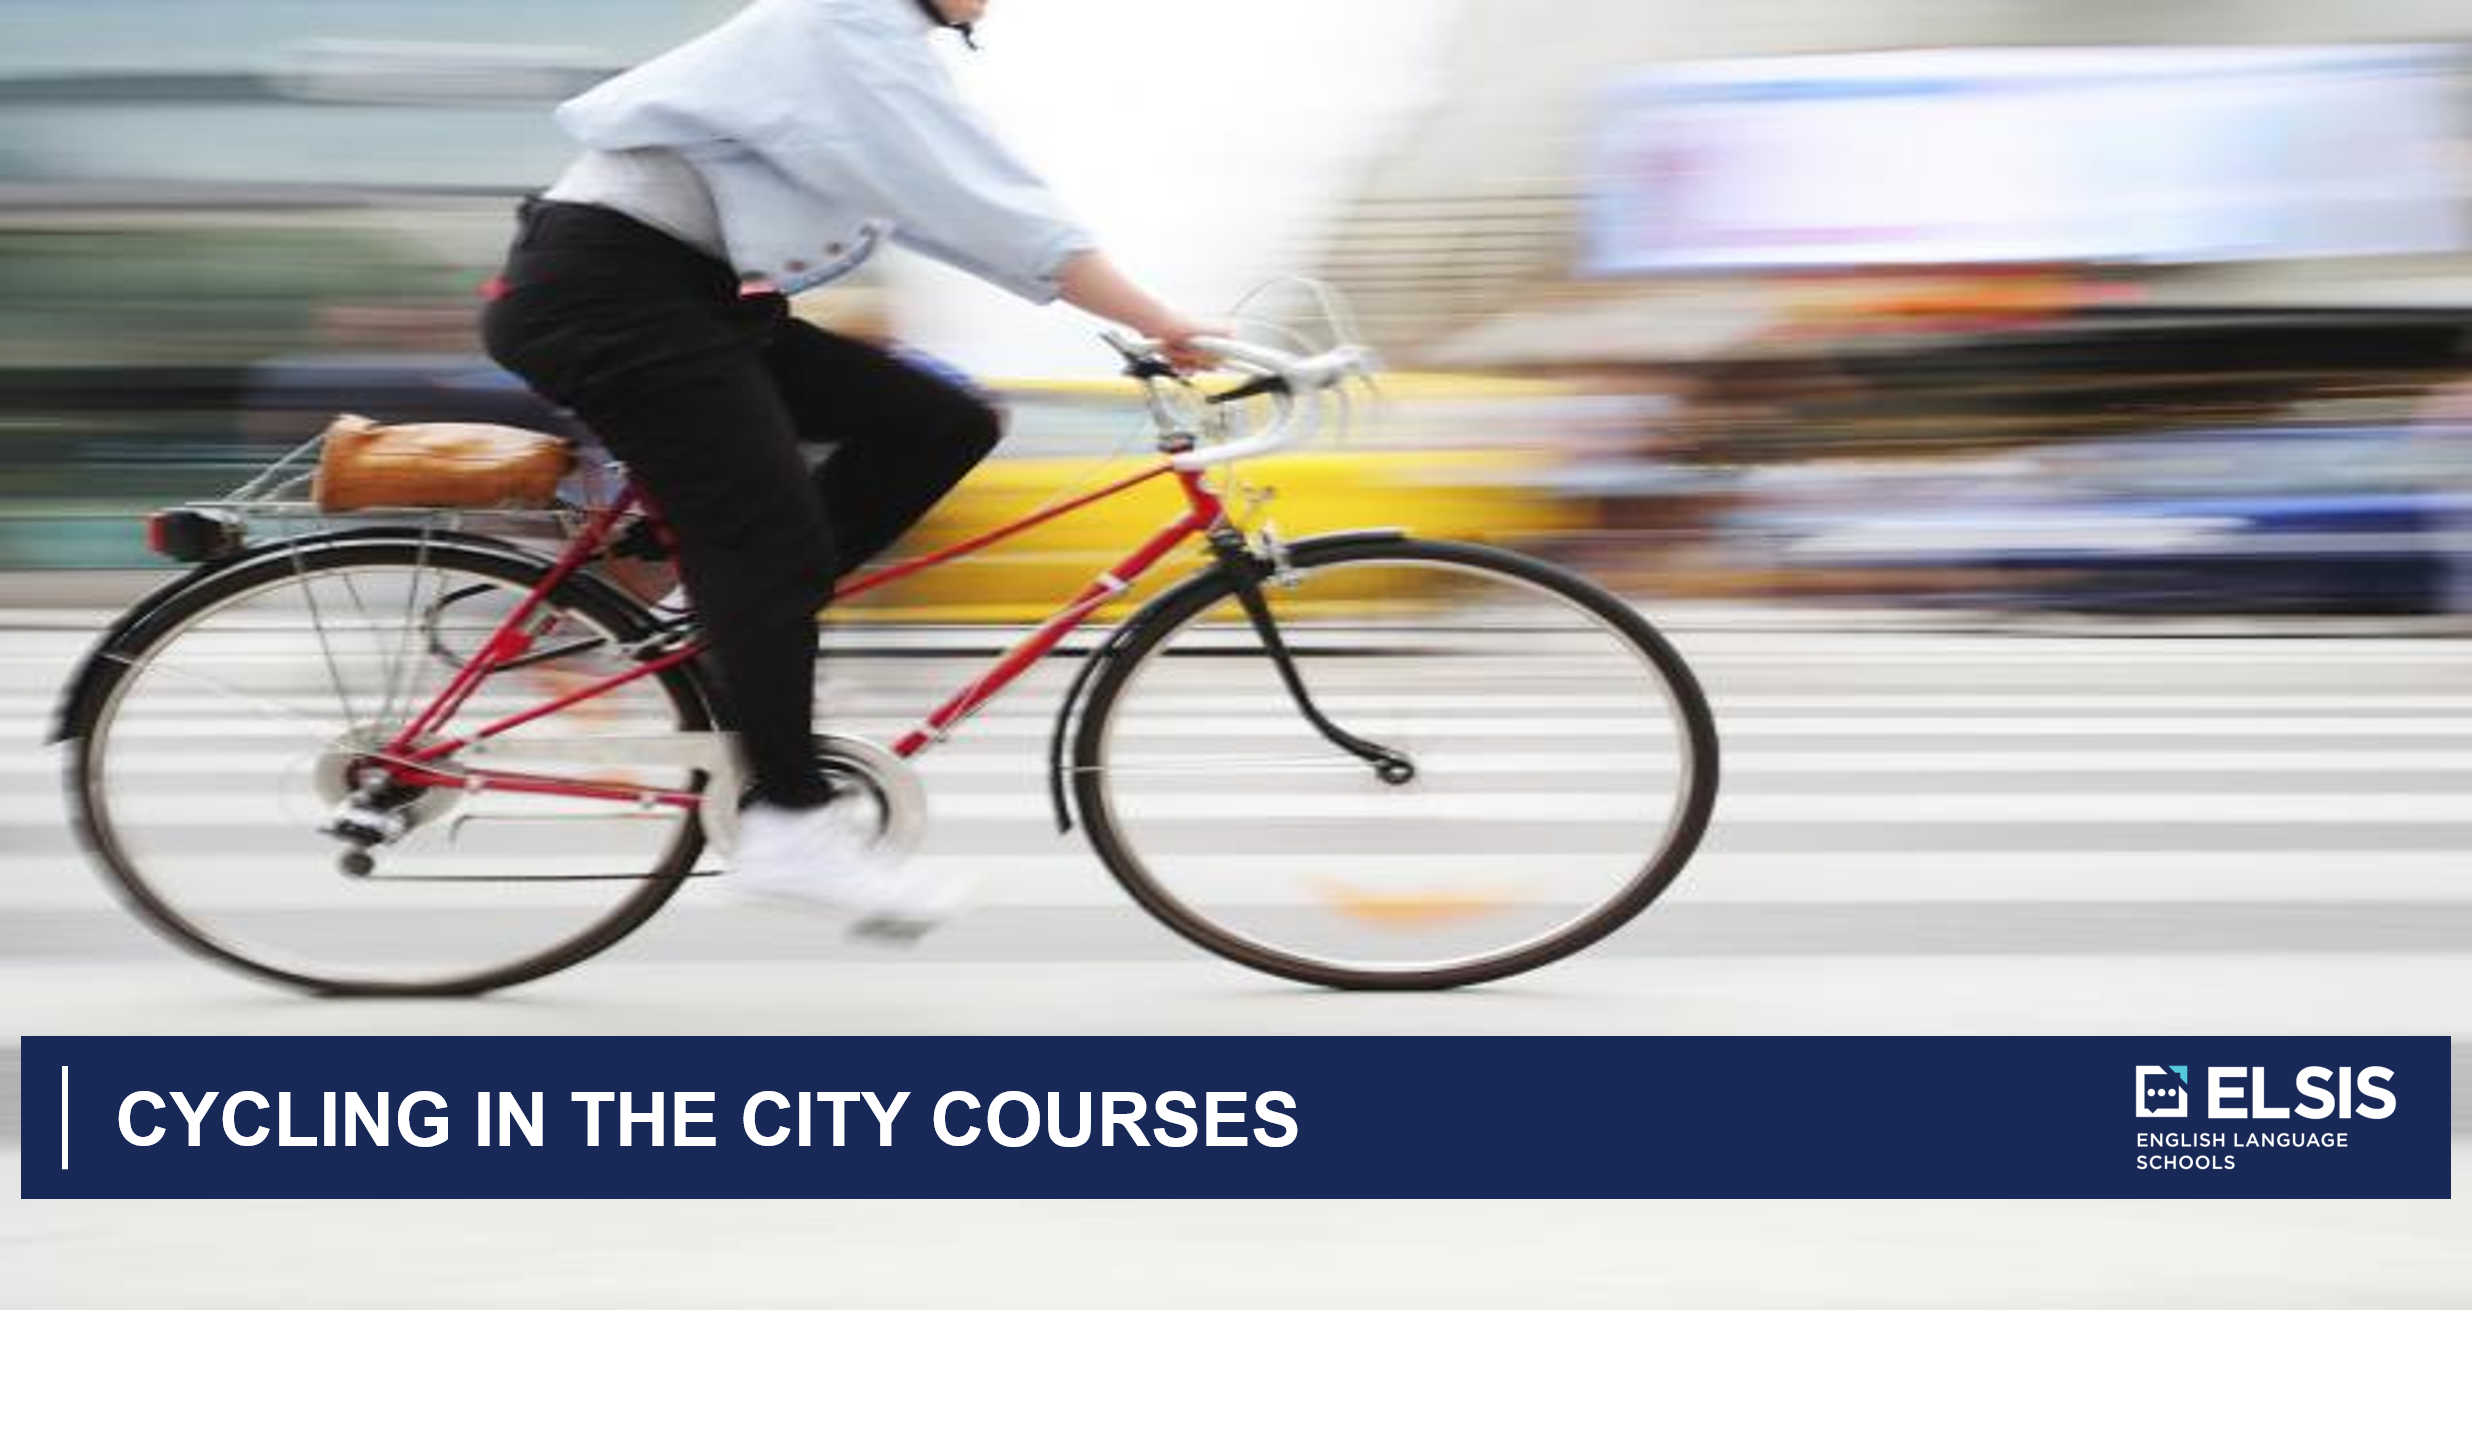 Cycling in the city courses